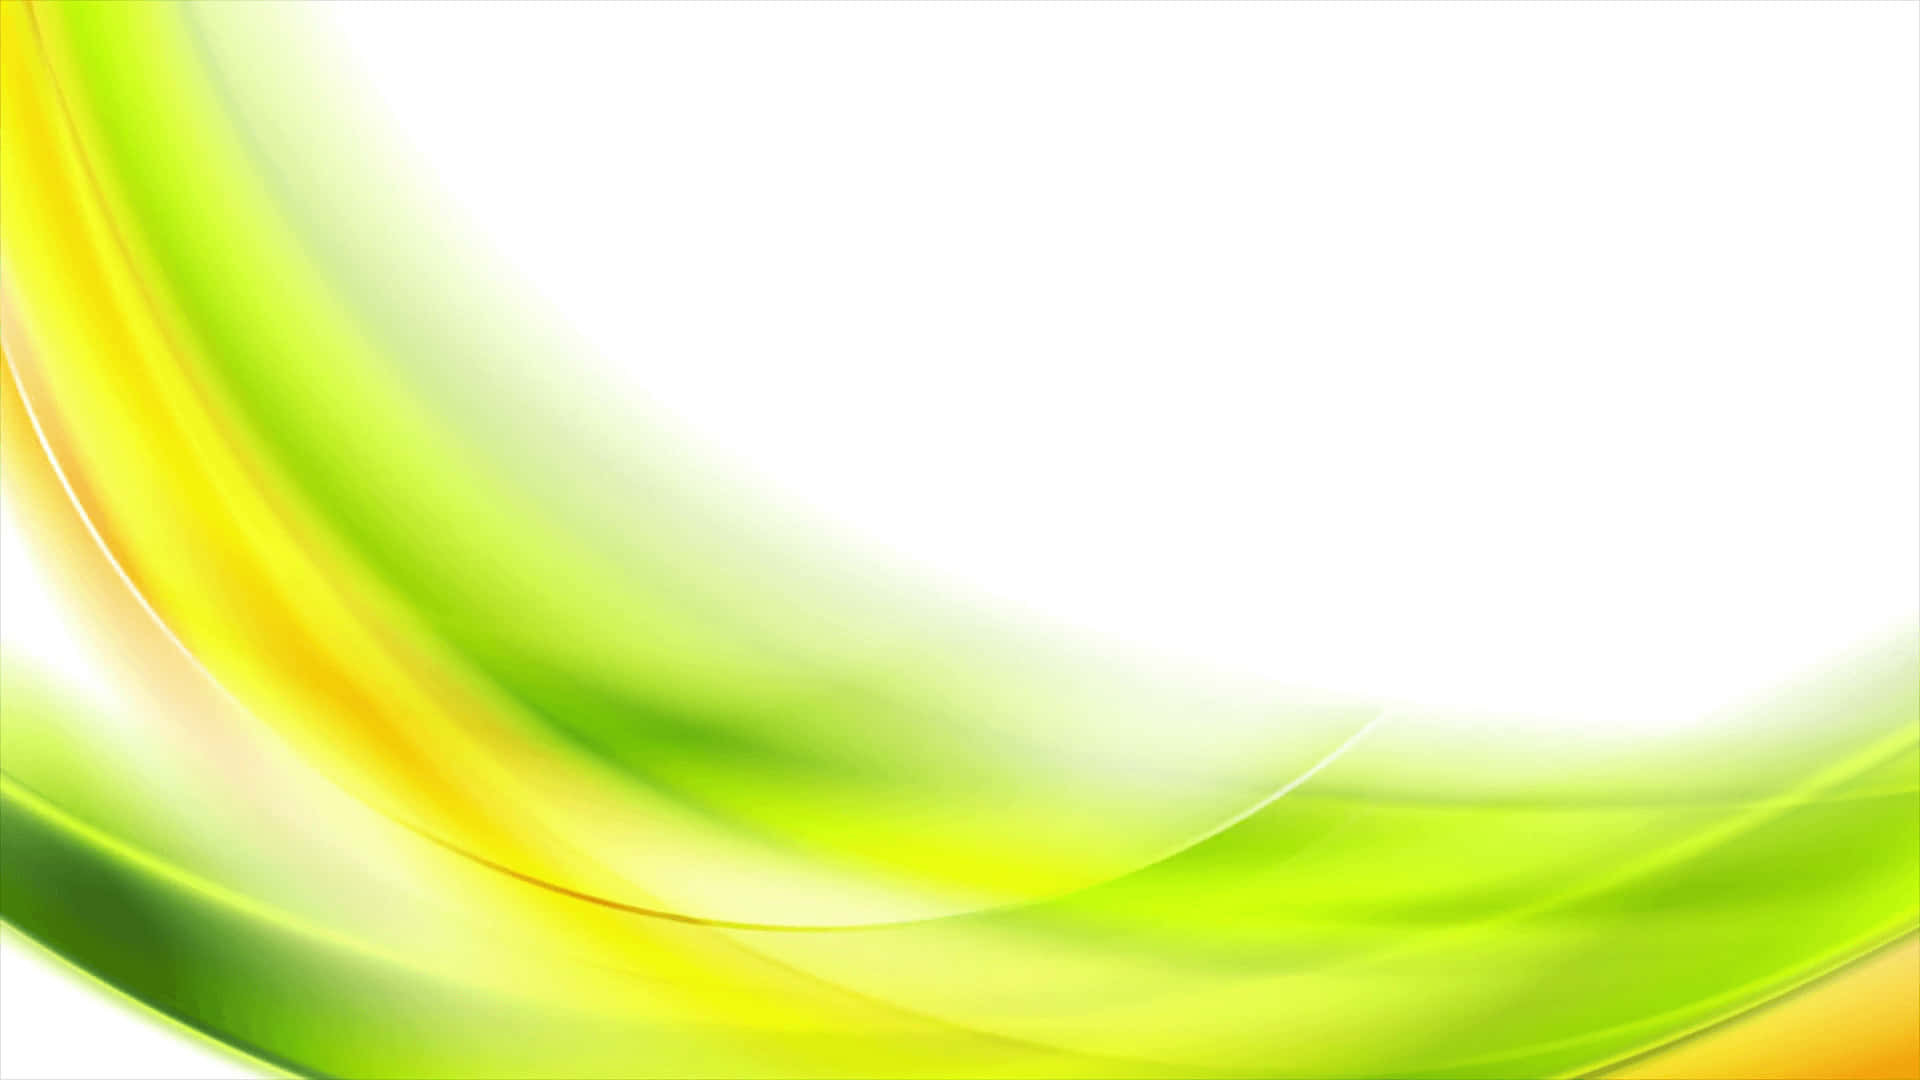 Download Abstract Green And Yellow Wave Background | Wallpapers.com